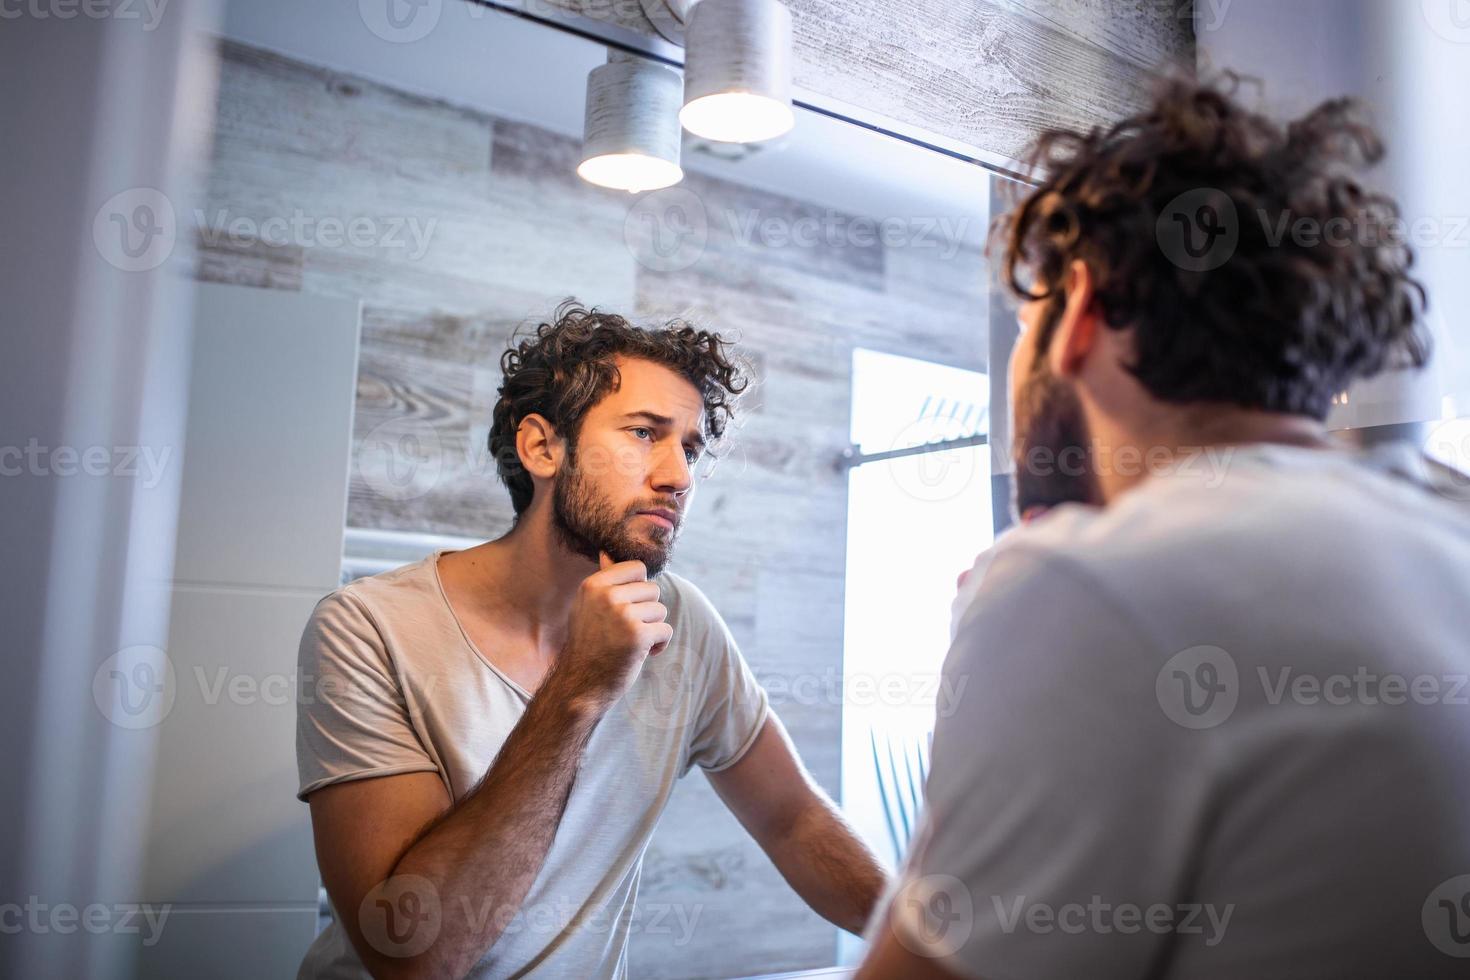 Morning hygiene, Handsome man in the bathroom looking in mirror. Reflection of handsome man with beard looking at mirror and touching face in bathroom grooming photo